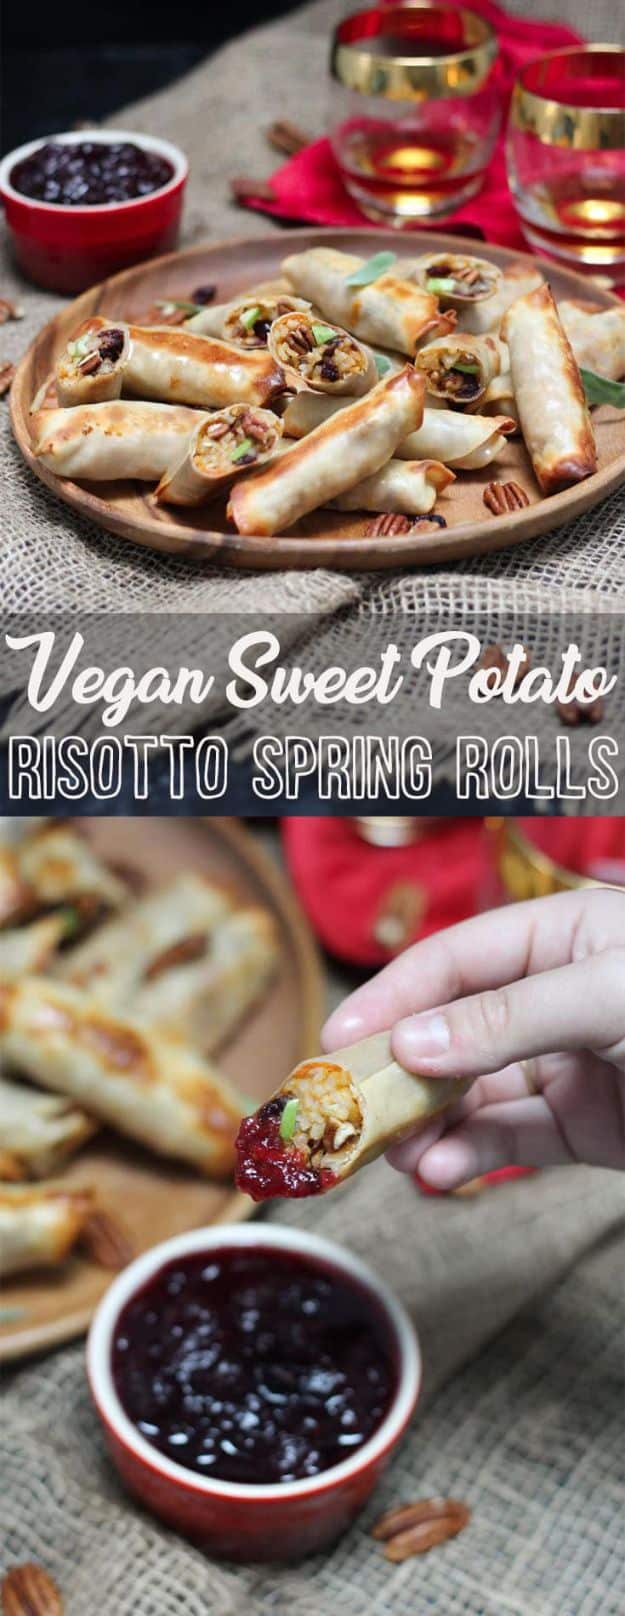 Gluten Free Appetizers - Sweet Potato Risotto Baked Spring Rolls - Easy Flourless and Glutenfree Snacks, Wraps, Finger Foods and Snack Recipes - Recipe Ideas for Gluten Free Diets #glutenfree 